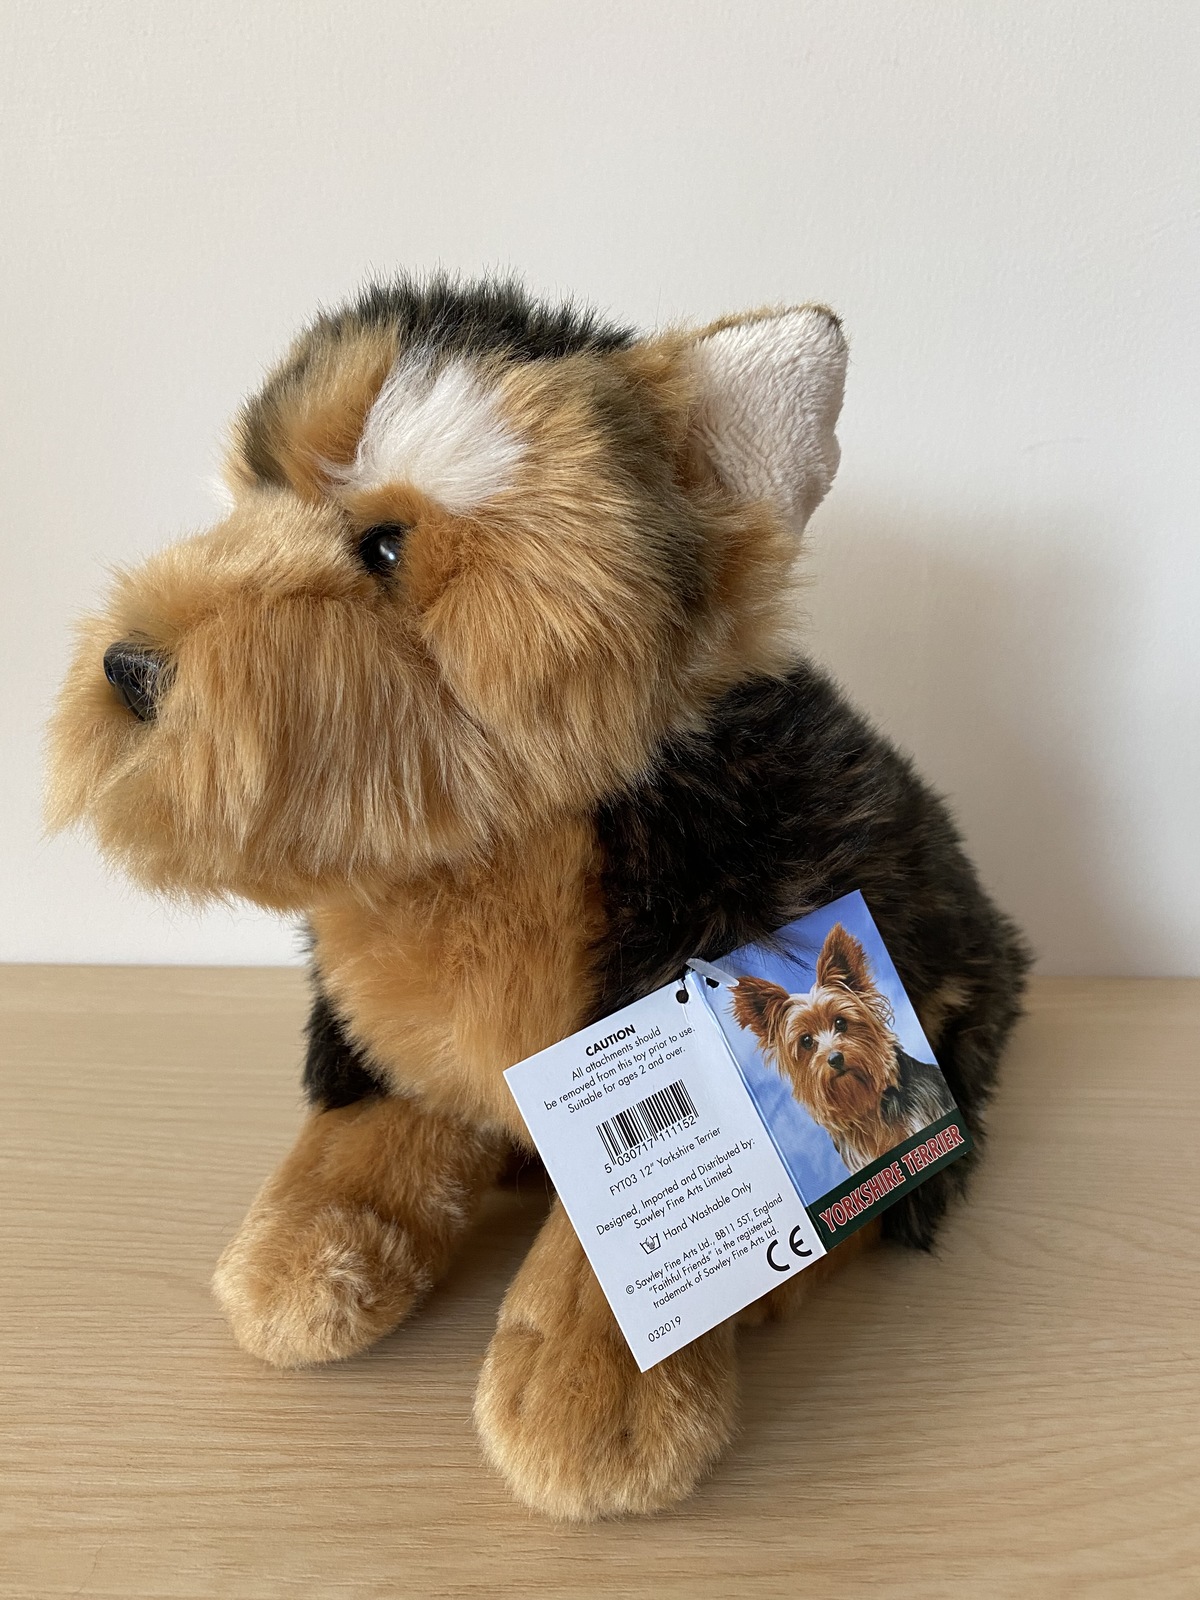 Yorkshire Terrier, gift wrapped, not gift wrapped with or without engraved tag  - $40.00 - $50.00